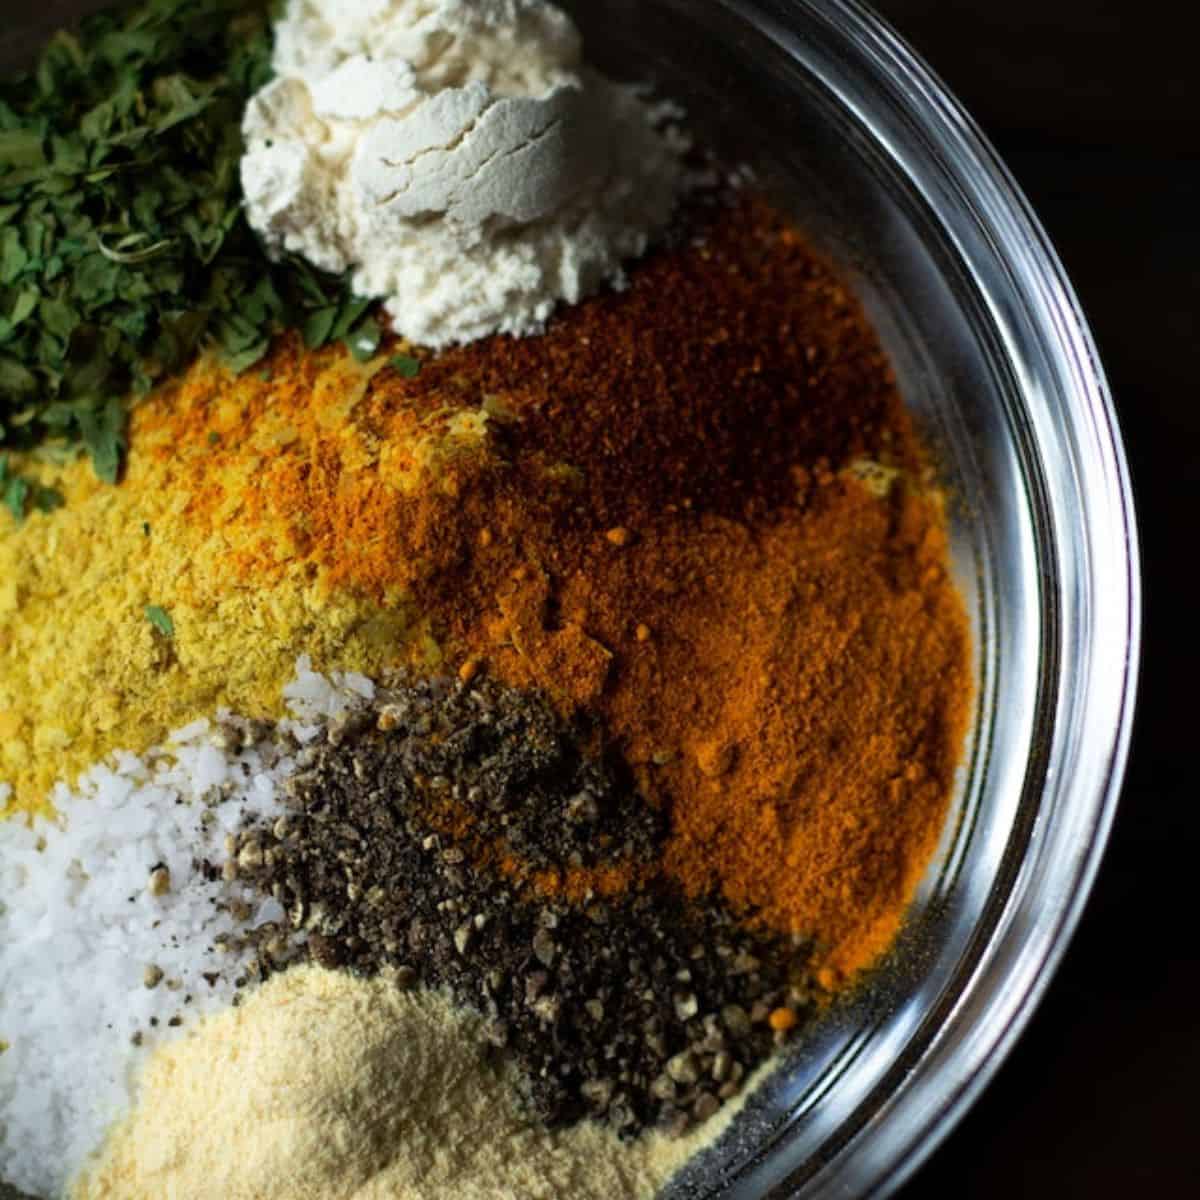 Different powders mixed in a glass bowl